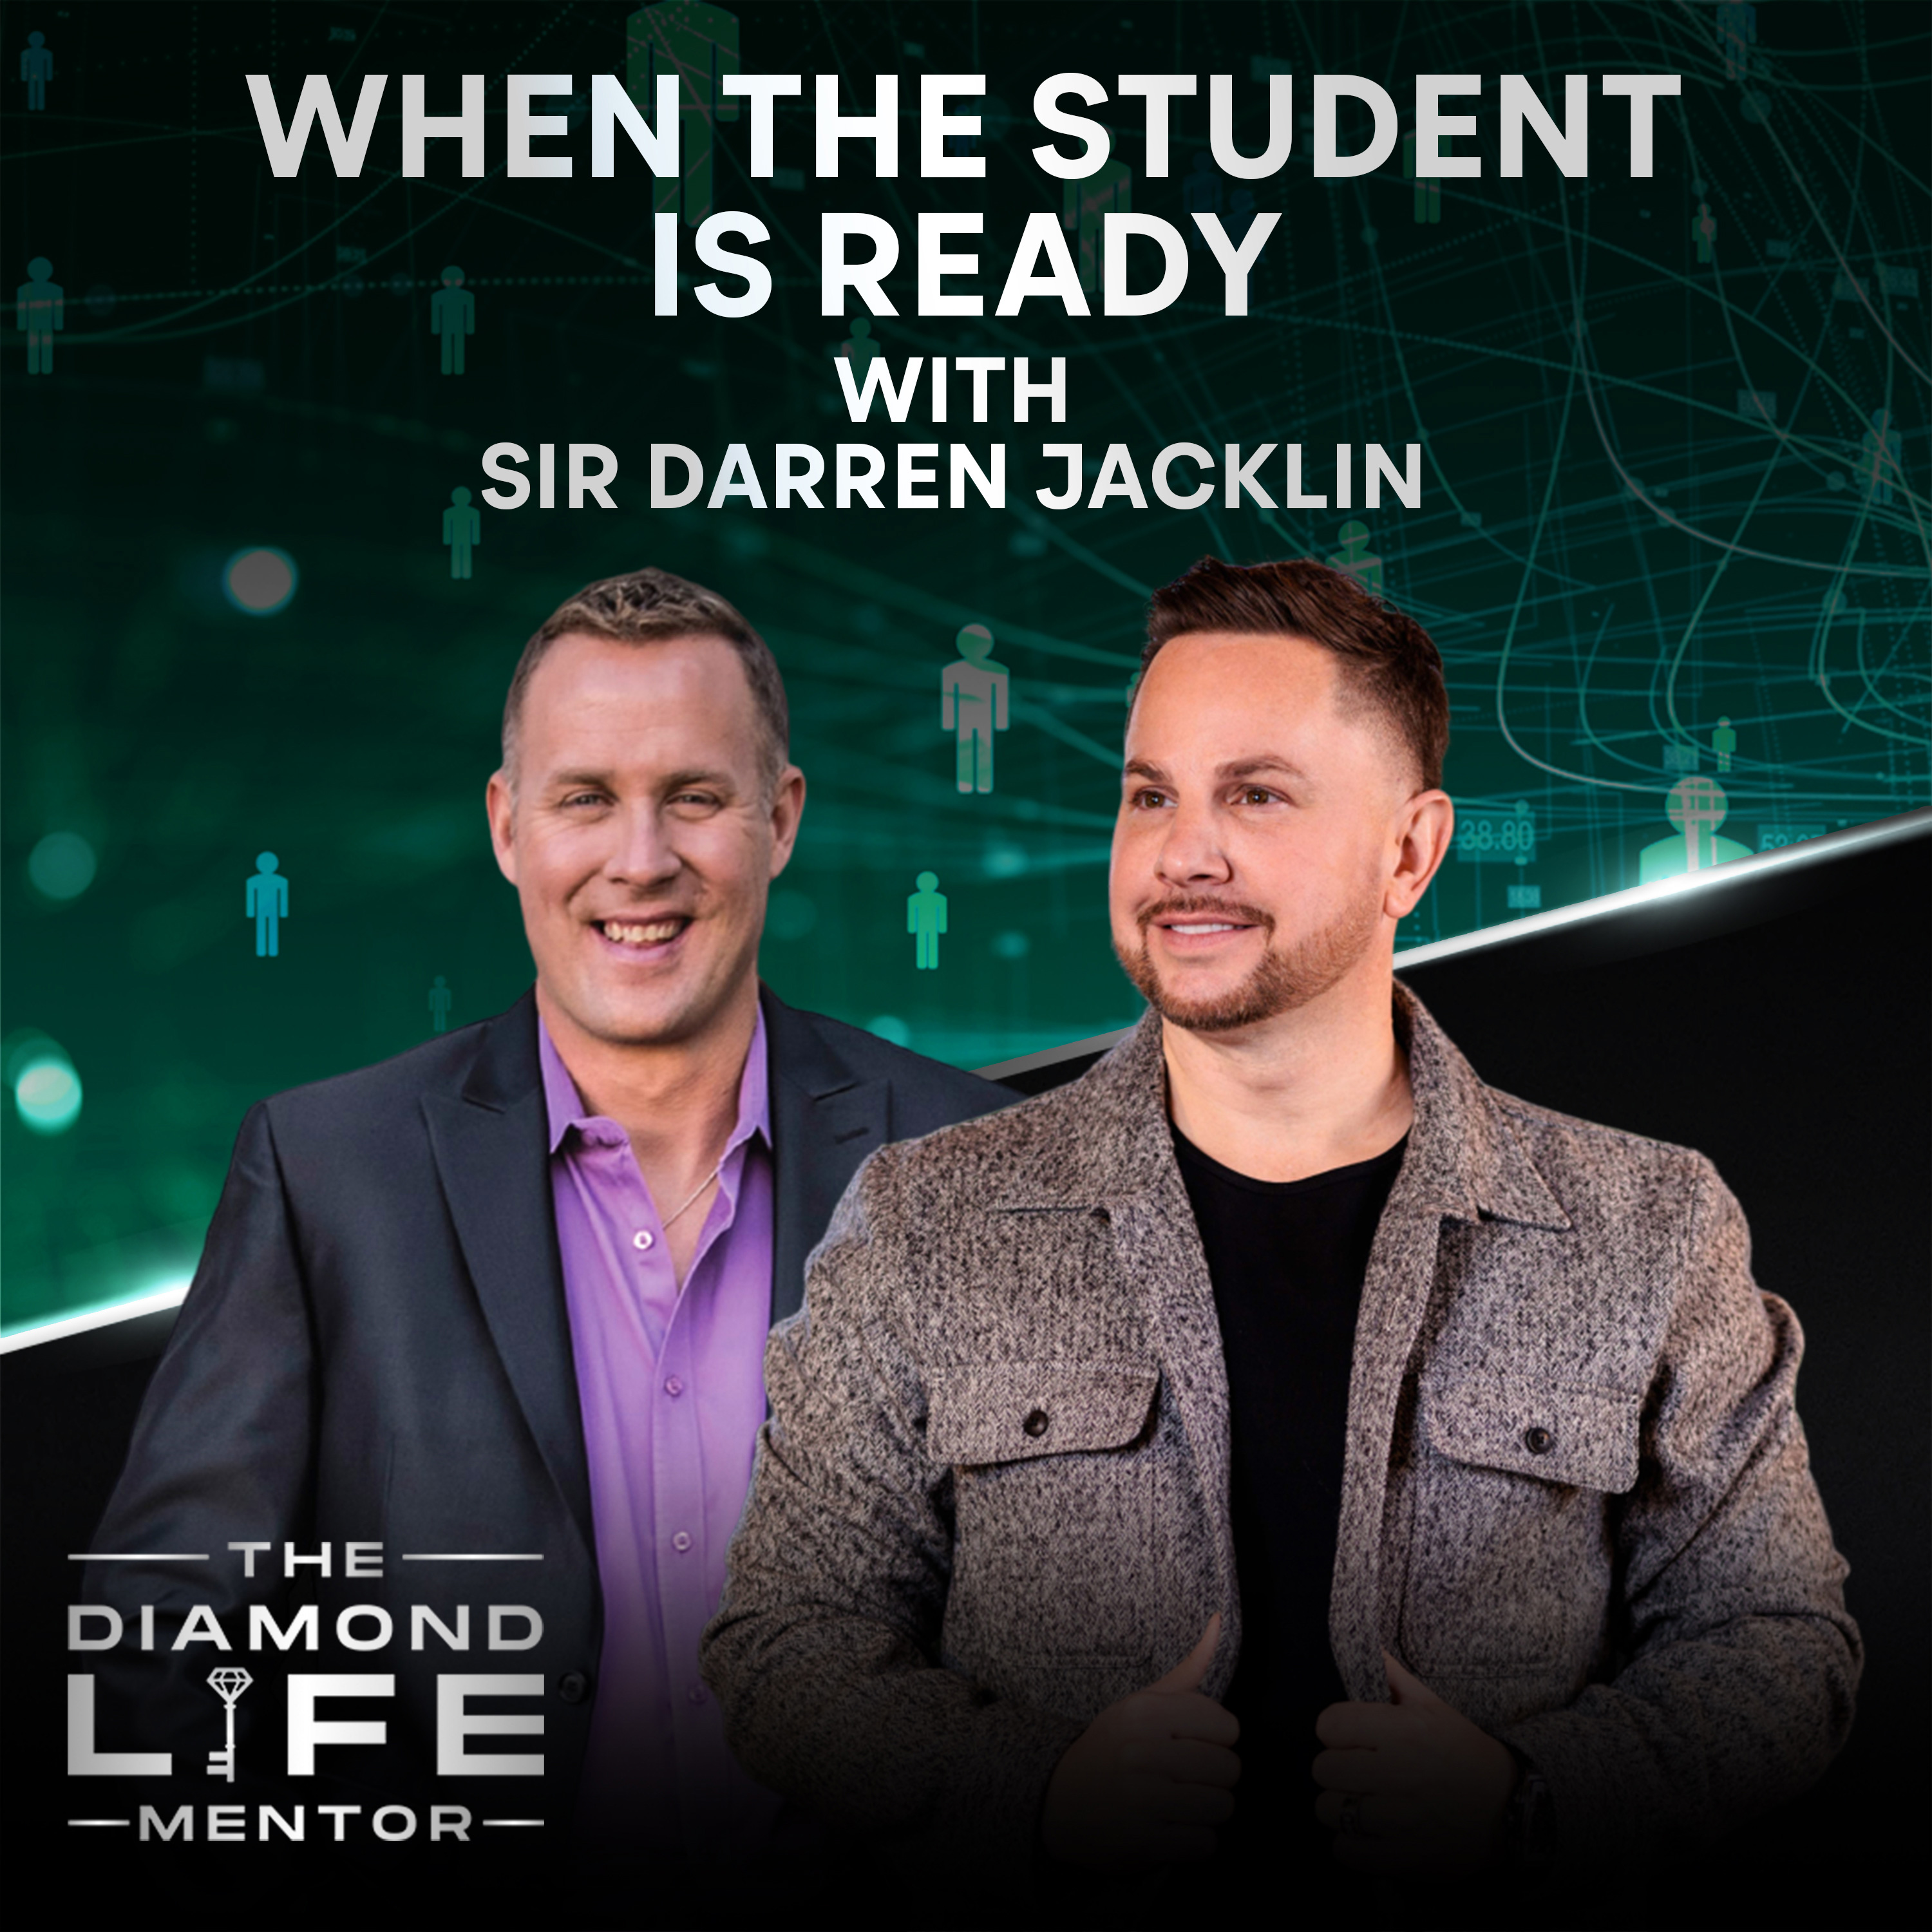 When the Student is Ready with Sir Darren Jacklin